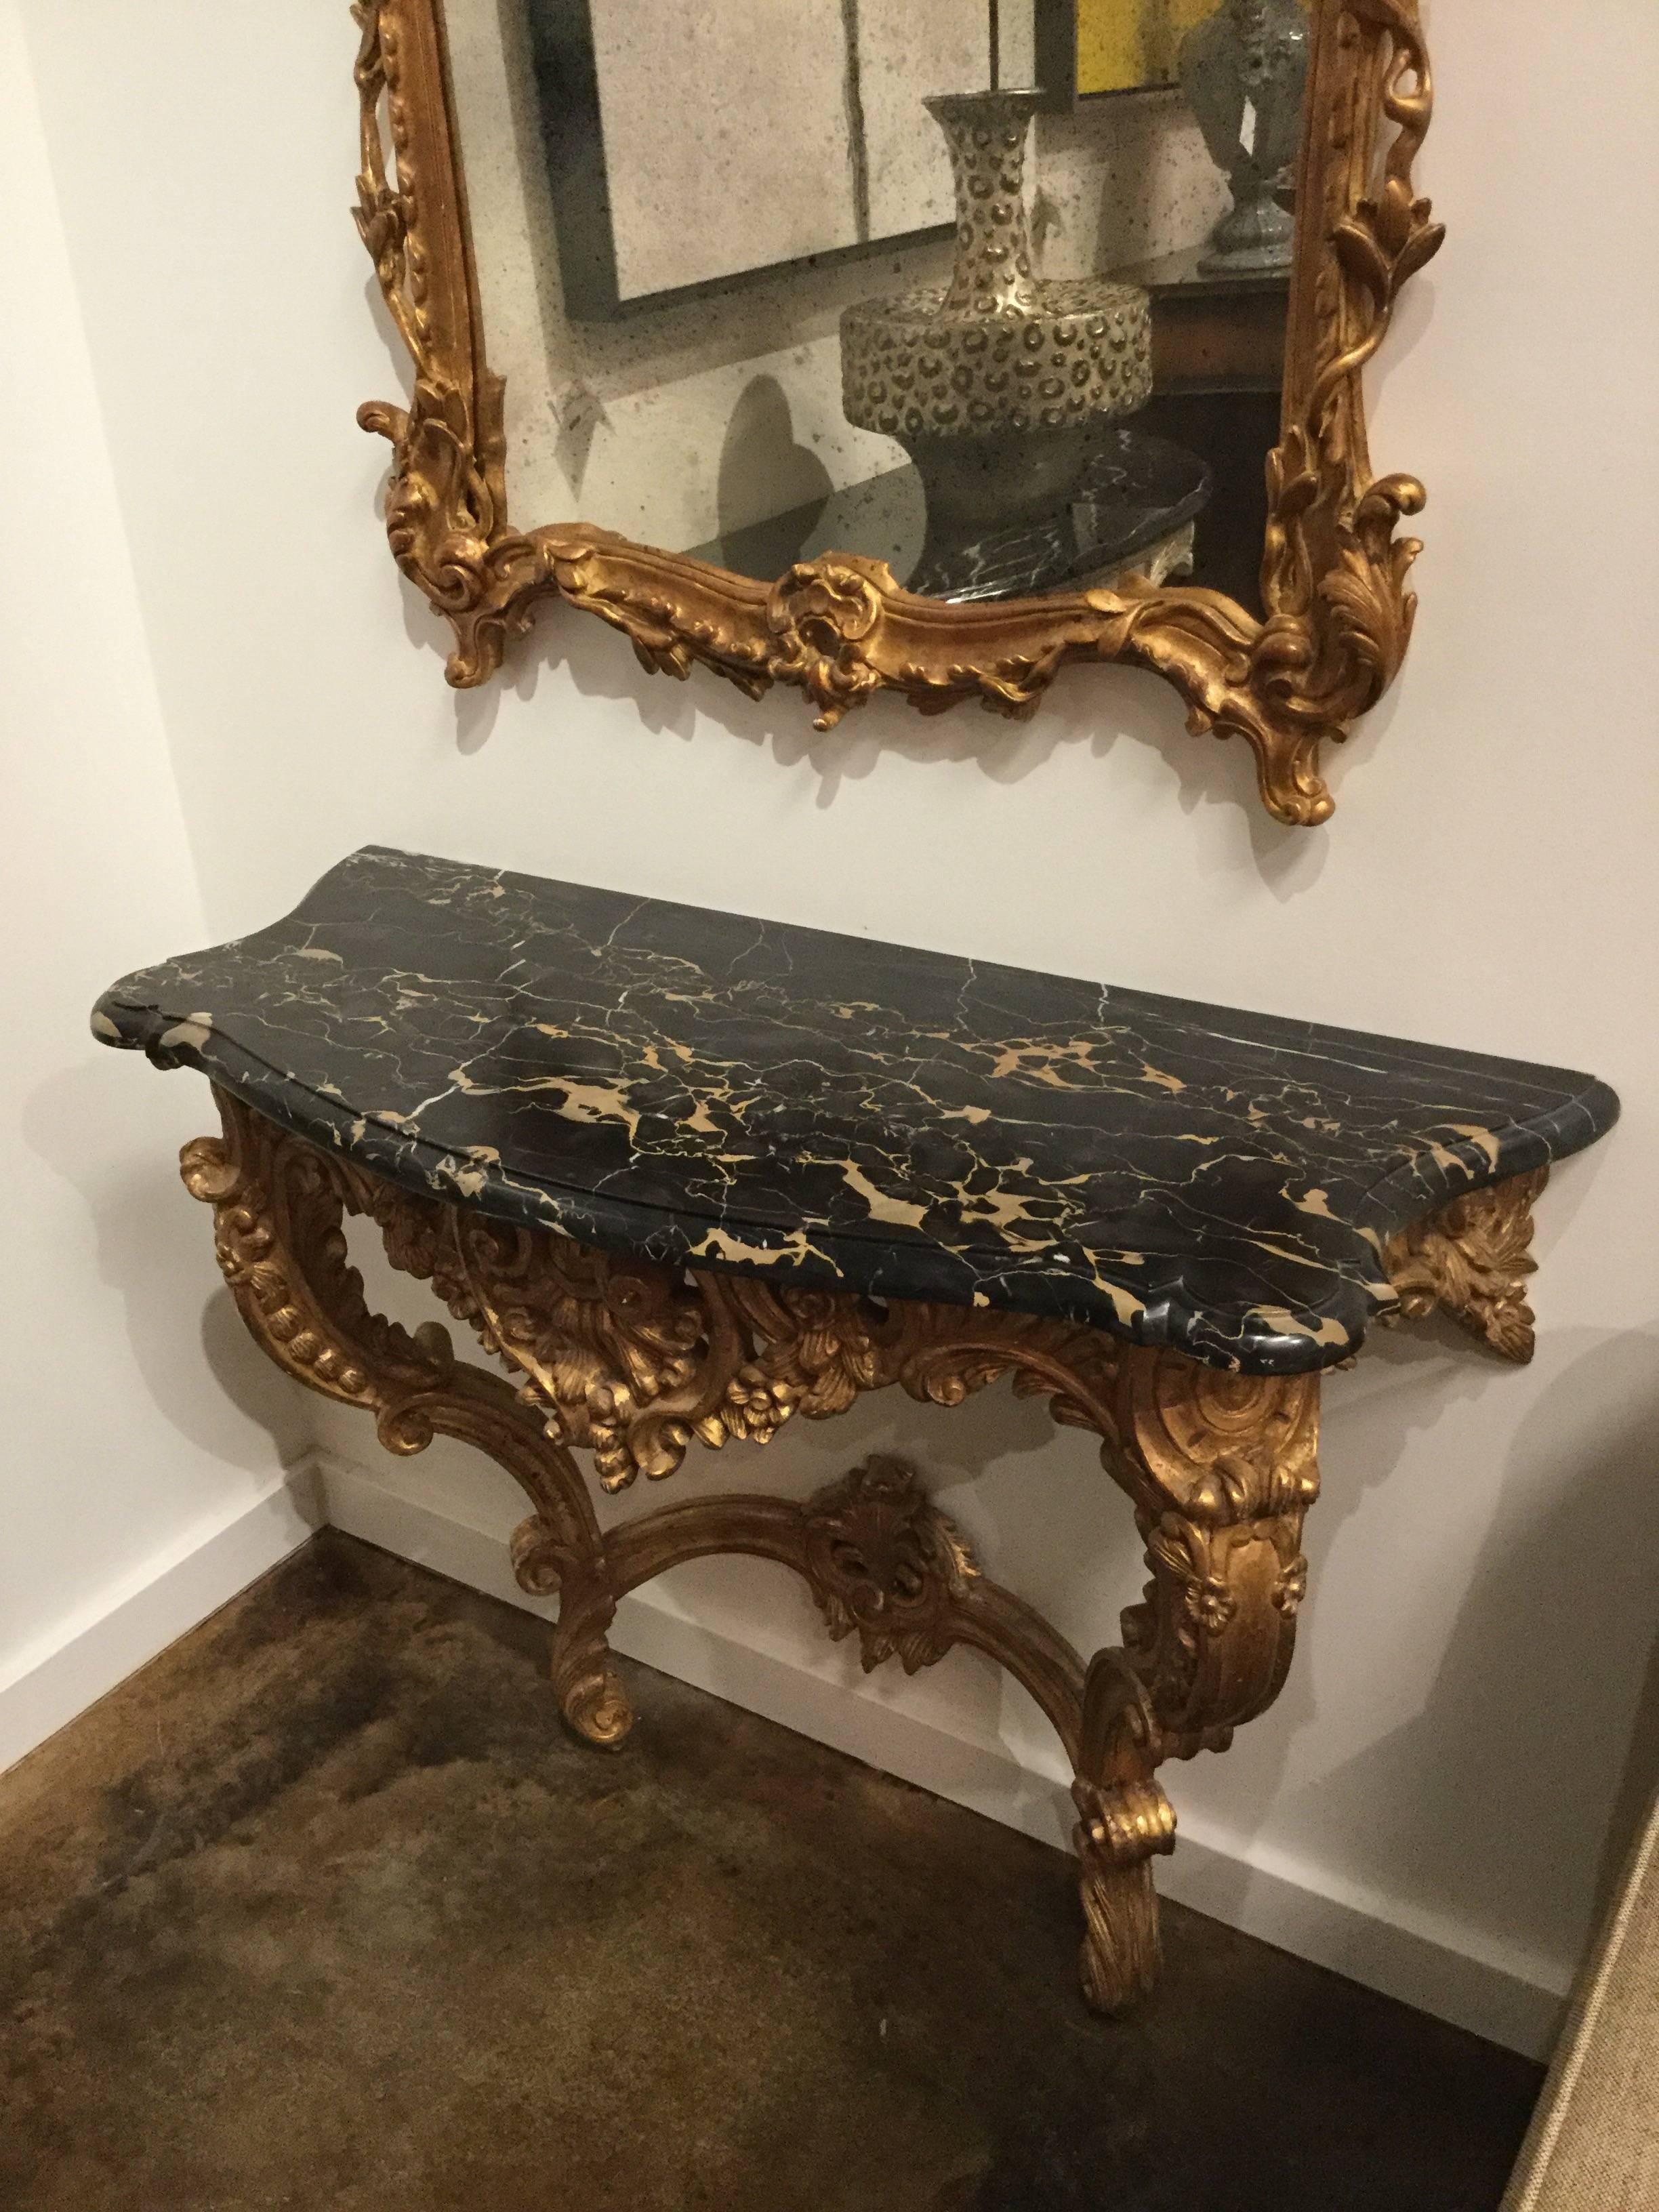 18th century style wall console heavily hand-carved with shells, rosettes and acanthus leaves, resting on two feet, finished in gold gilt and topped with a charcoal colored marble, Italy.